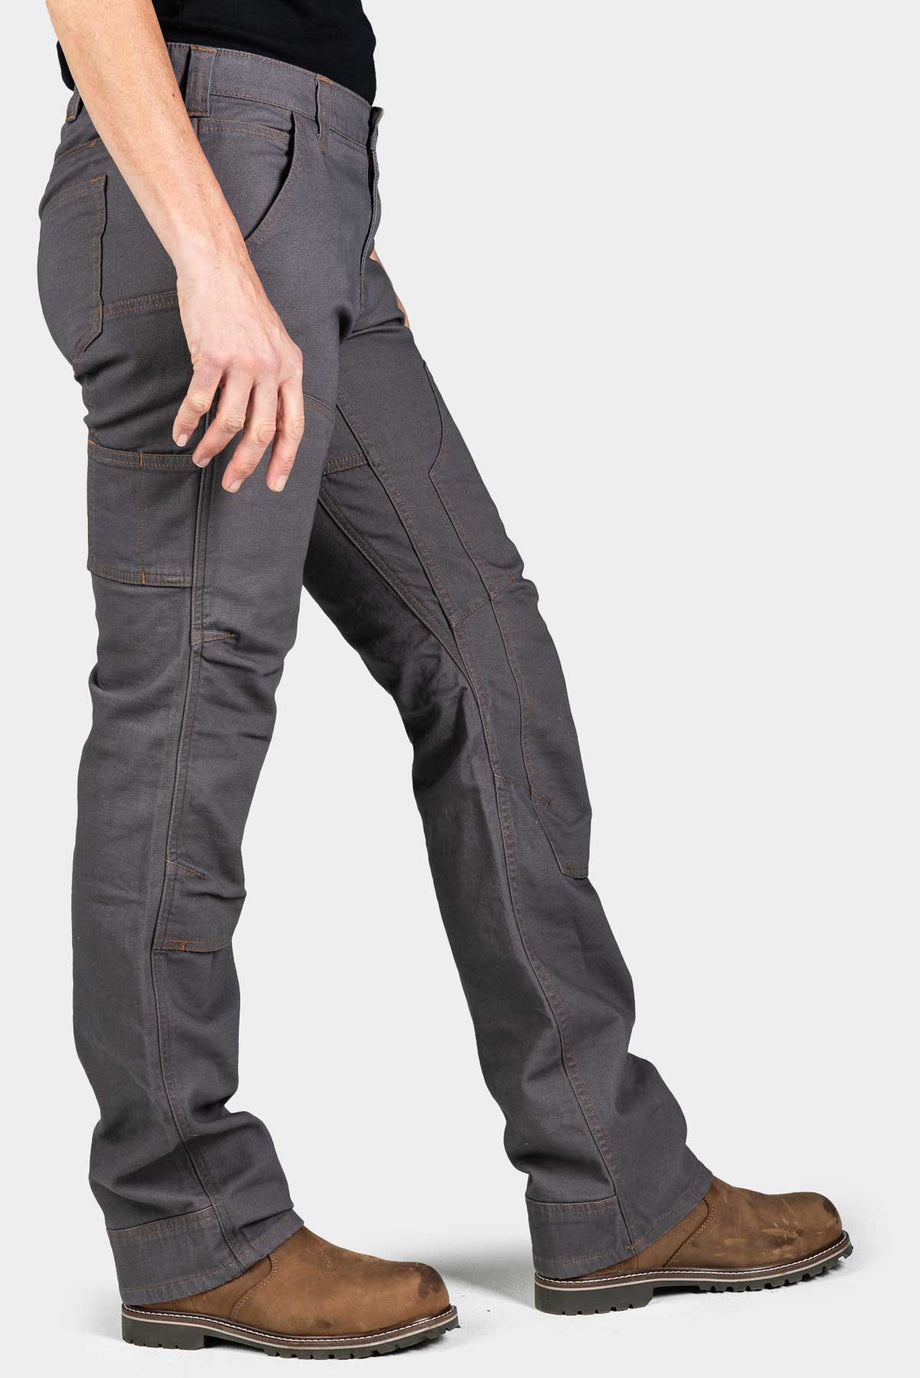 Dovetail Workwear Christa DIY Pants, 33 Inseam - Womens, FREE SHIPPING in  Canada